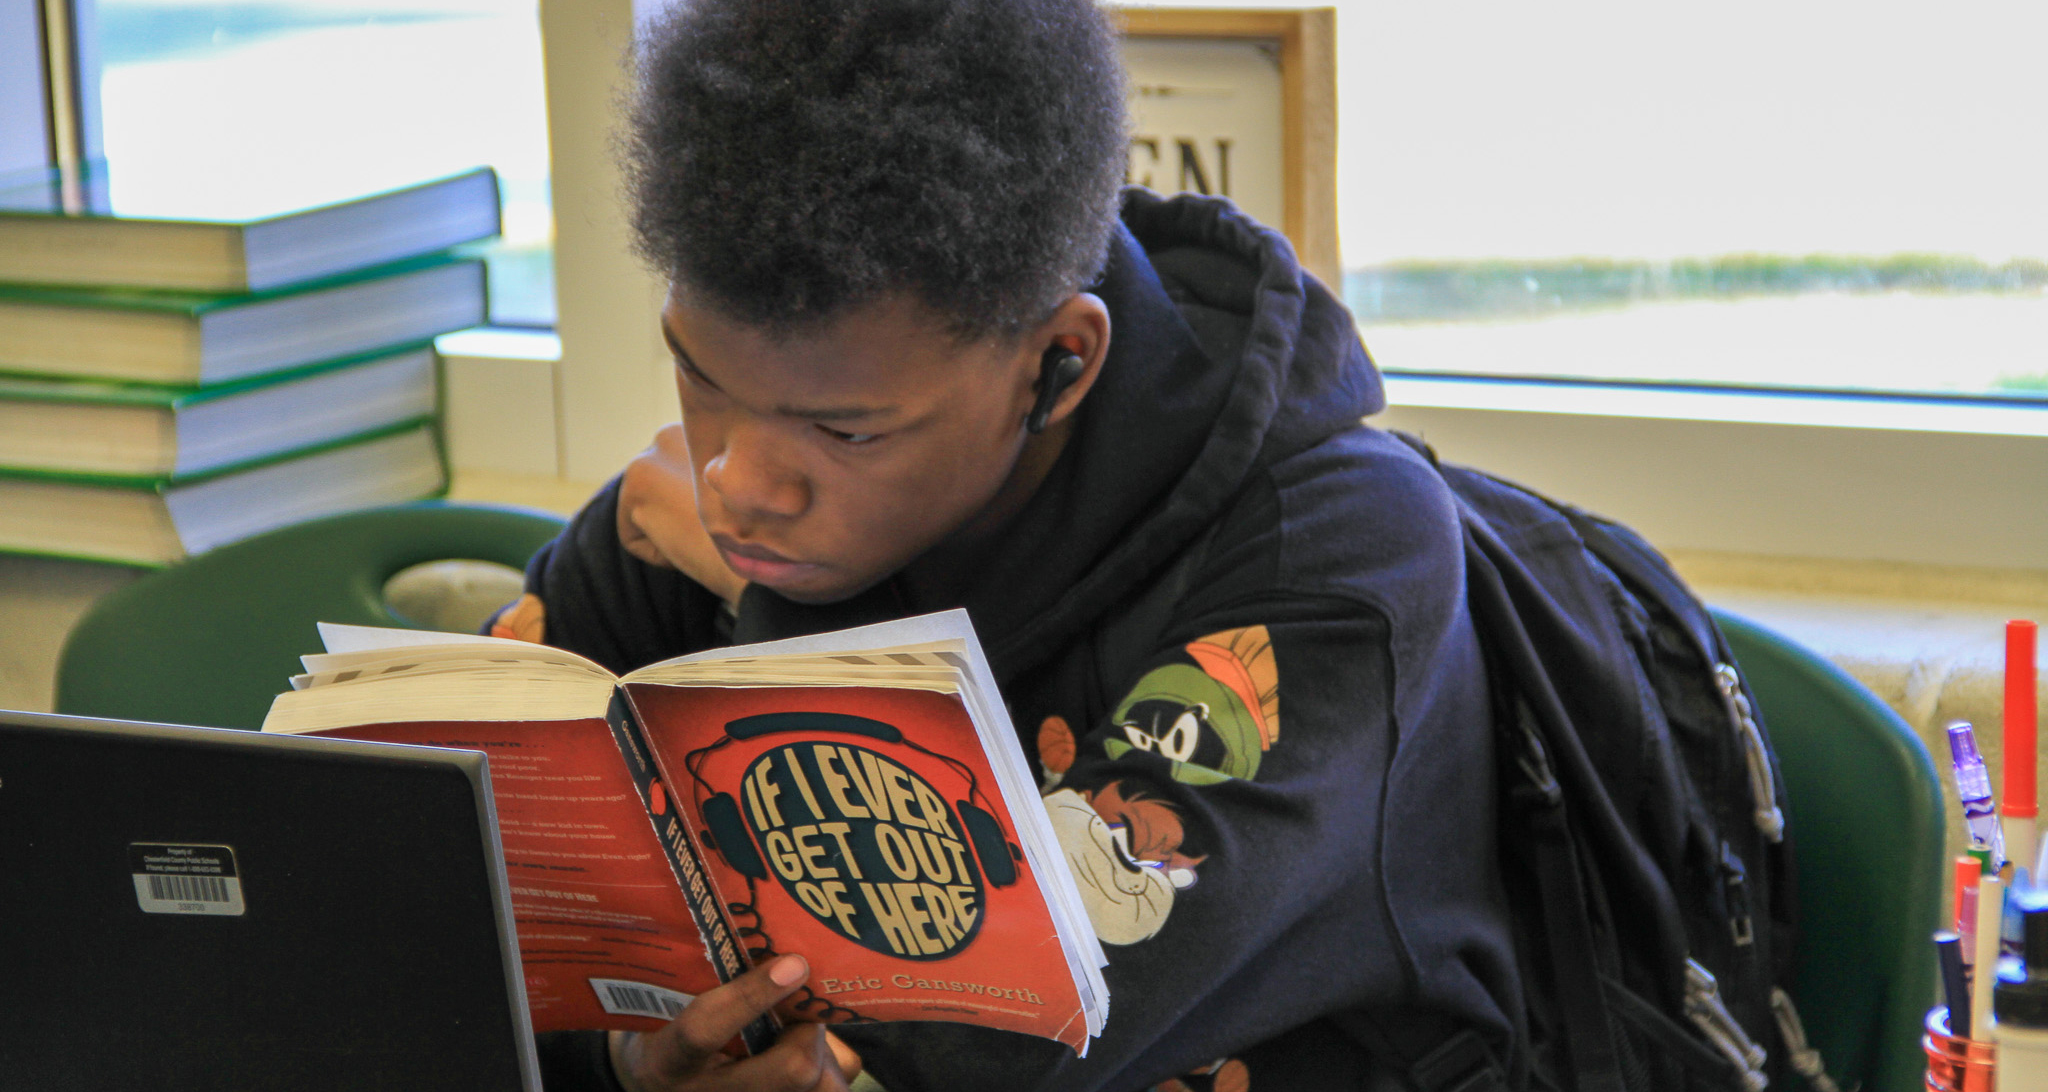 A student reading a book in class